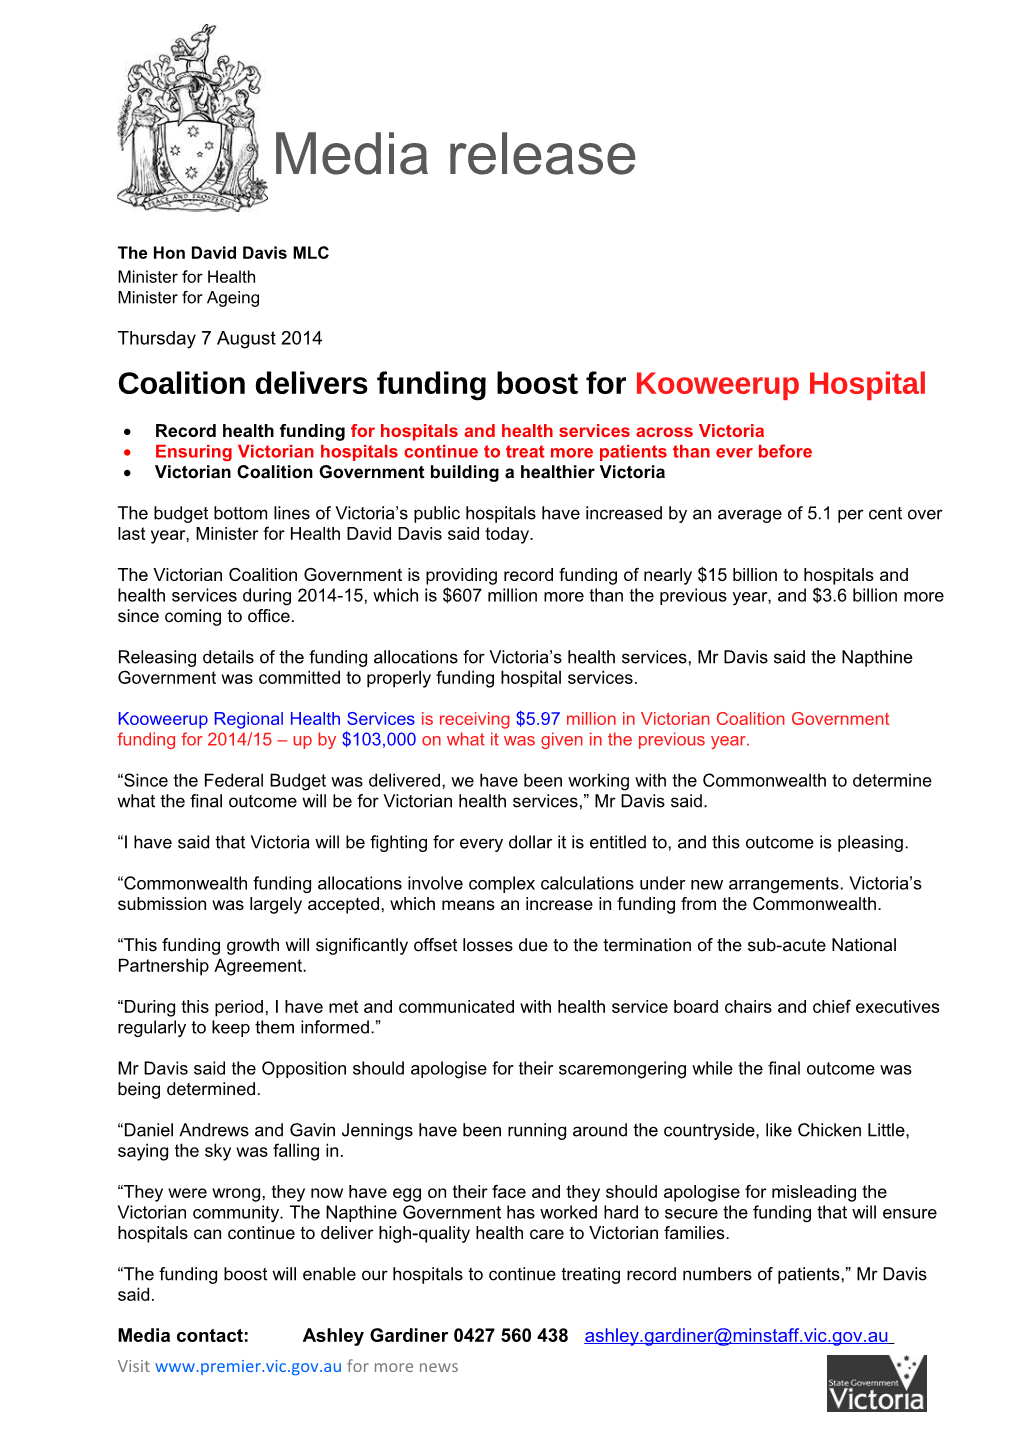 Coalition Delivers Funding Boost for Kooweerup Hospital